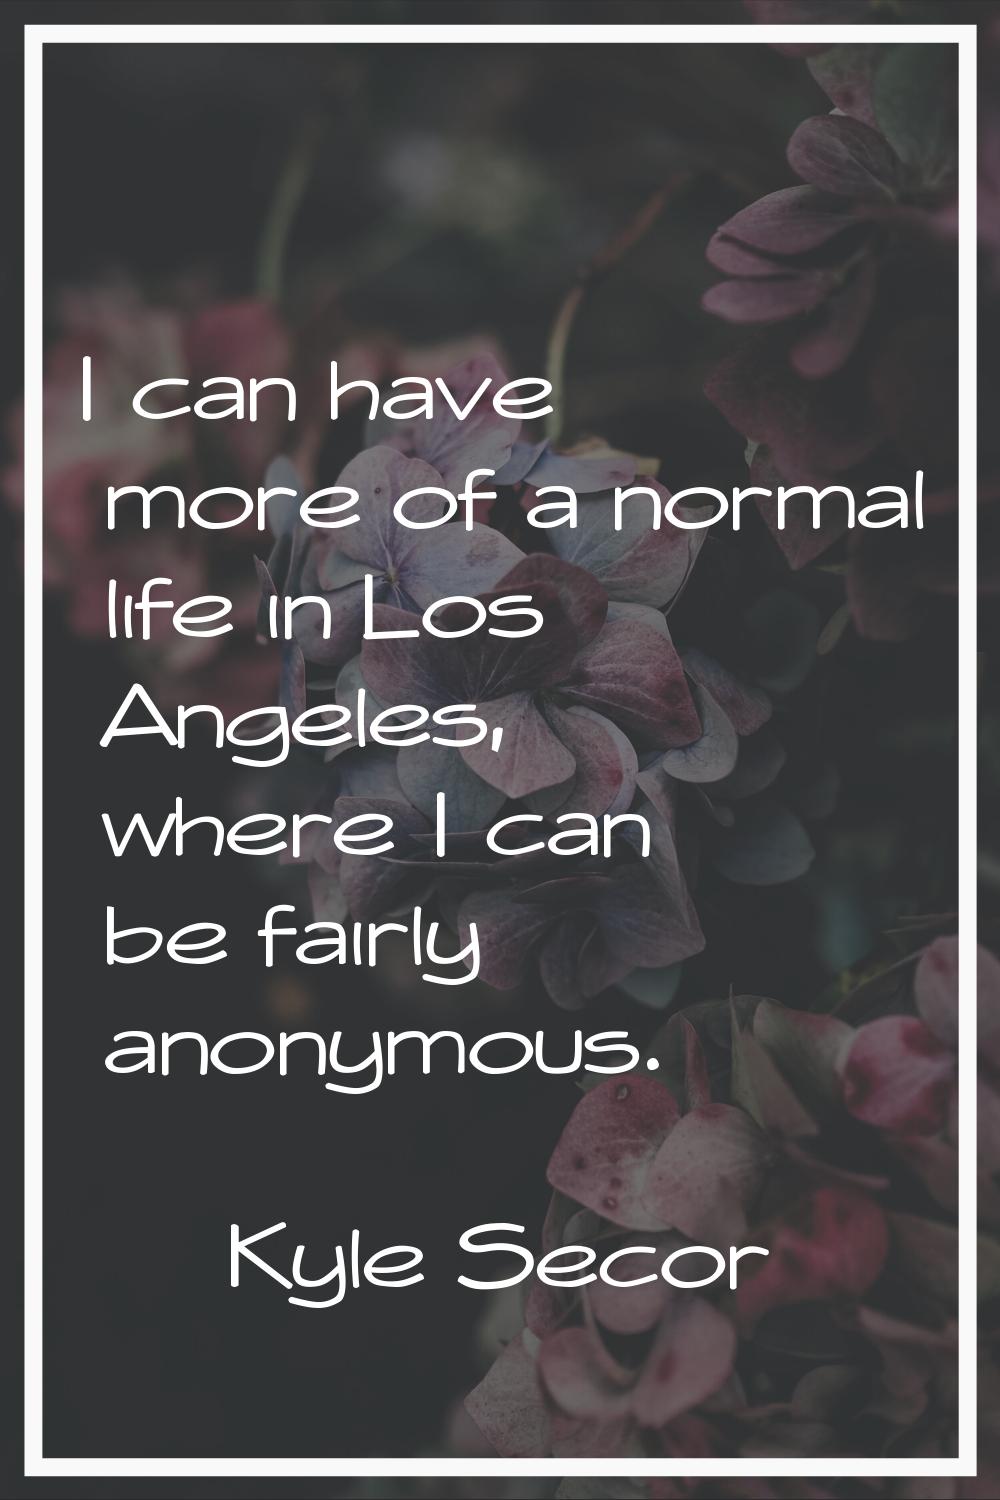 I can have more of a normal life in Los Angeles, where I can be fairly anonymous.